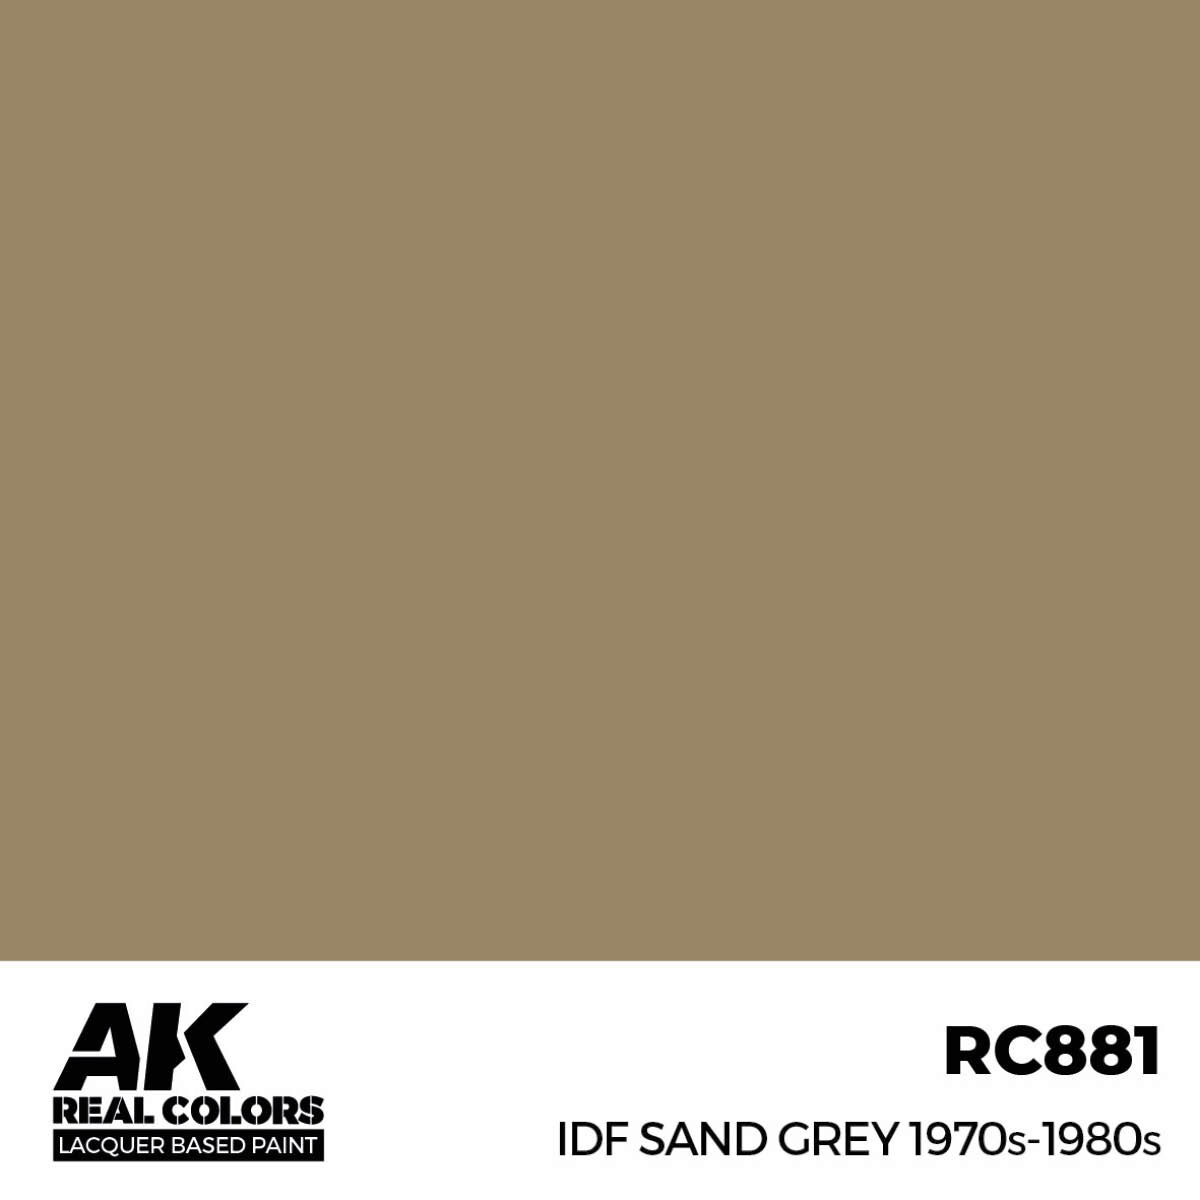 AK RC881 Real Colors IDF Sand Grey 1970S-1980S 17 ml.